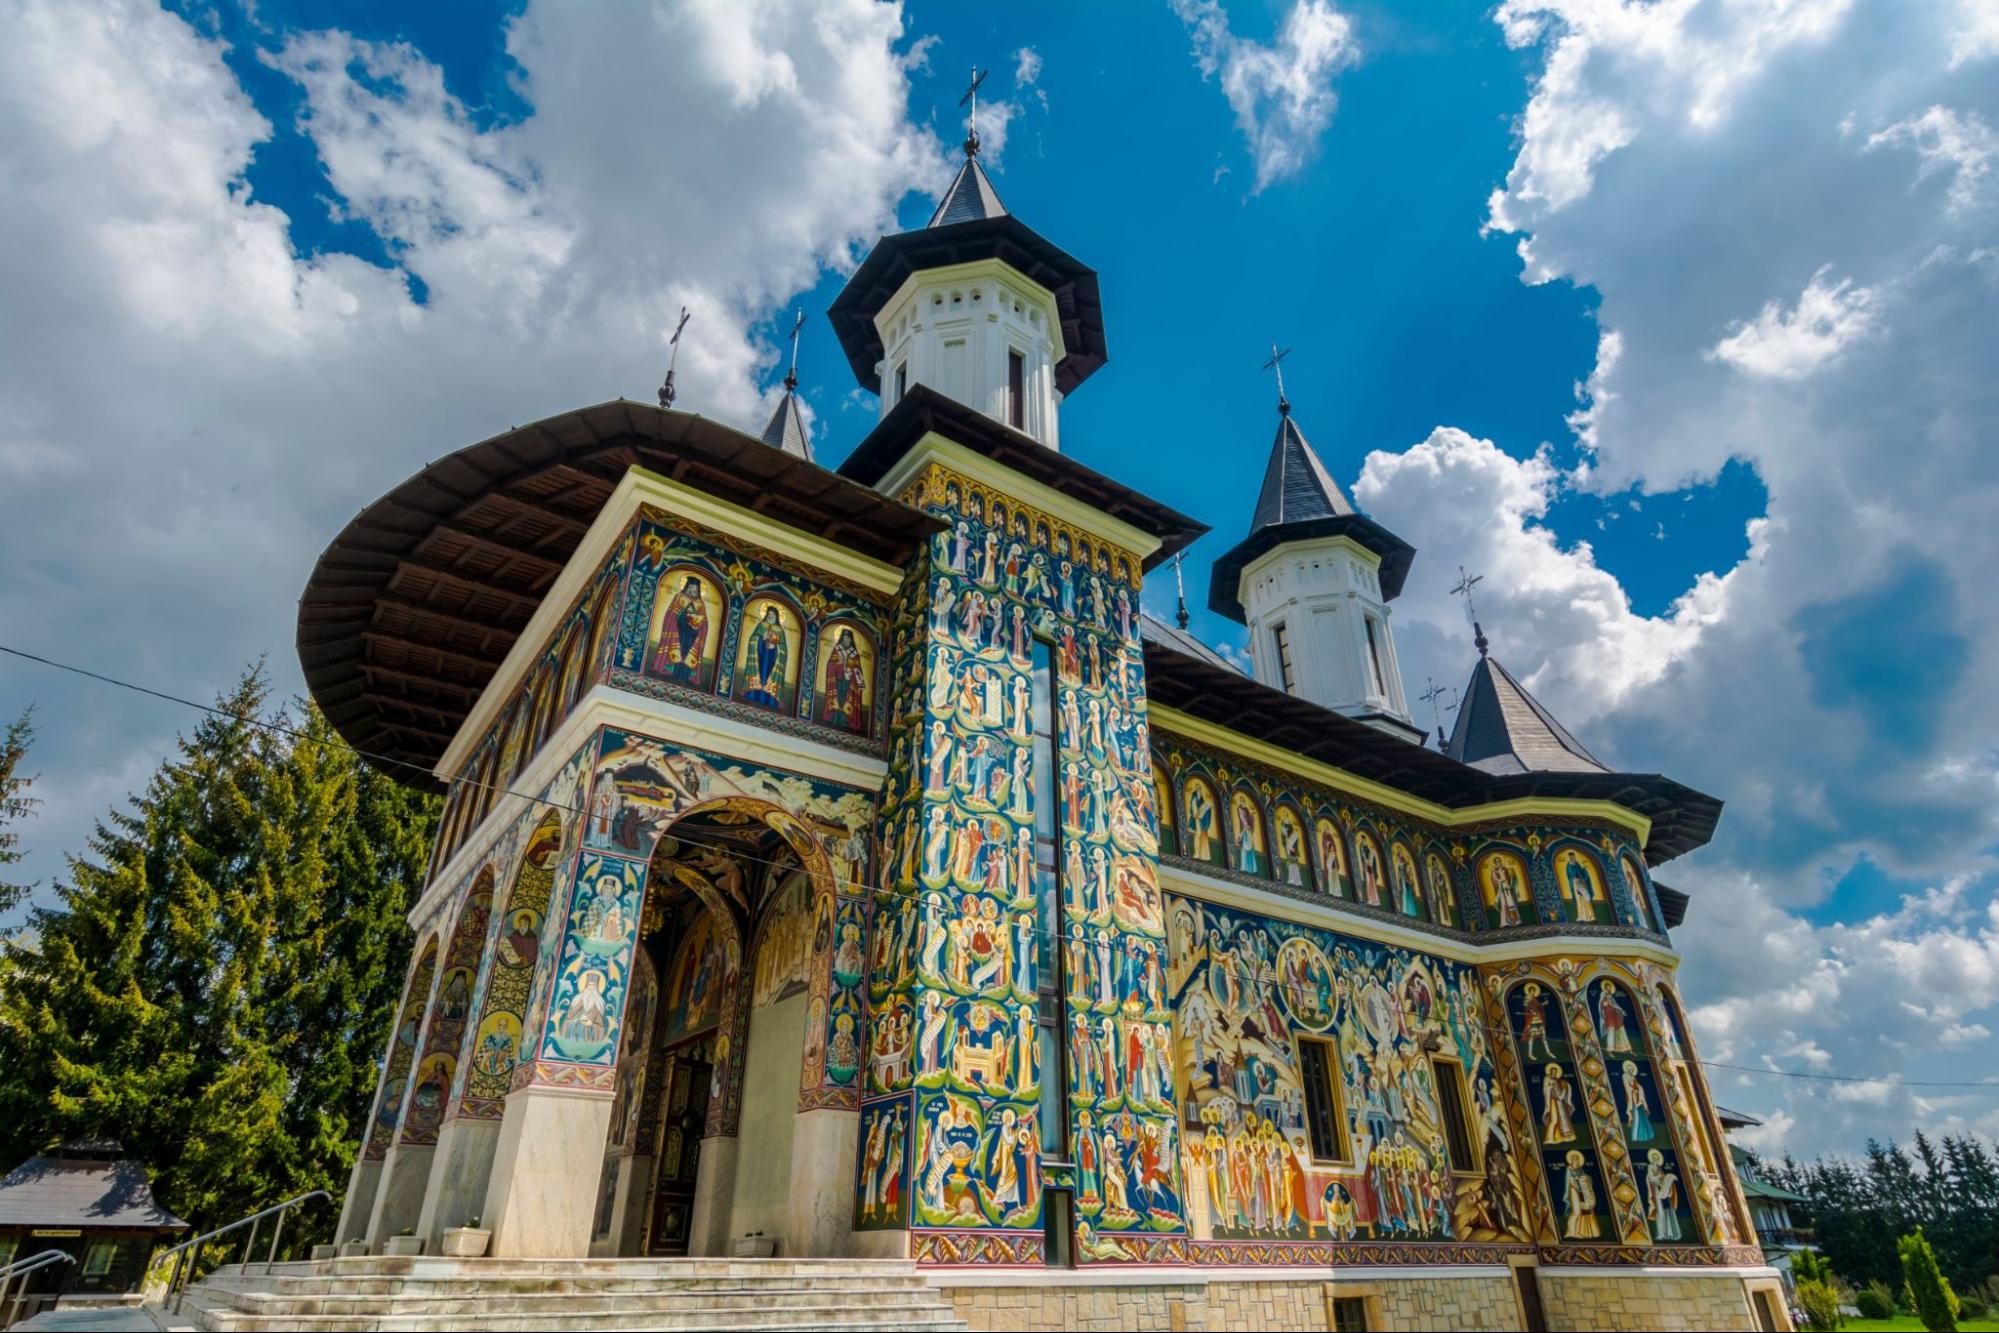 Colorful facade mural painted fresco at Neamt Monastery, Romania